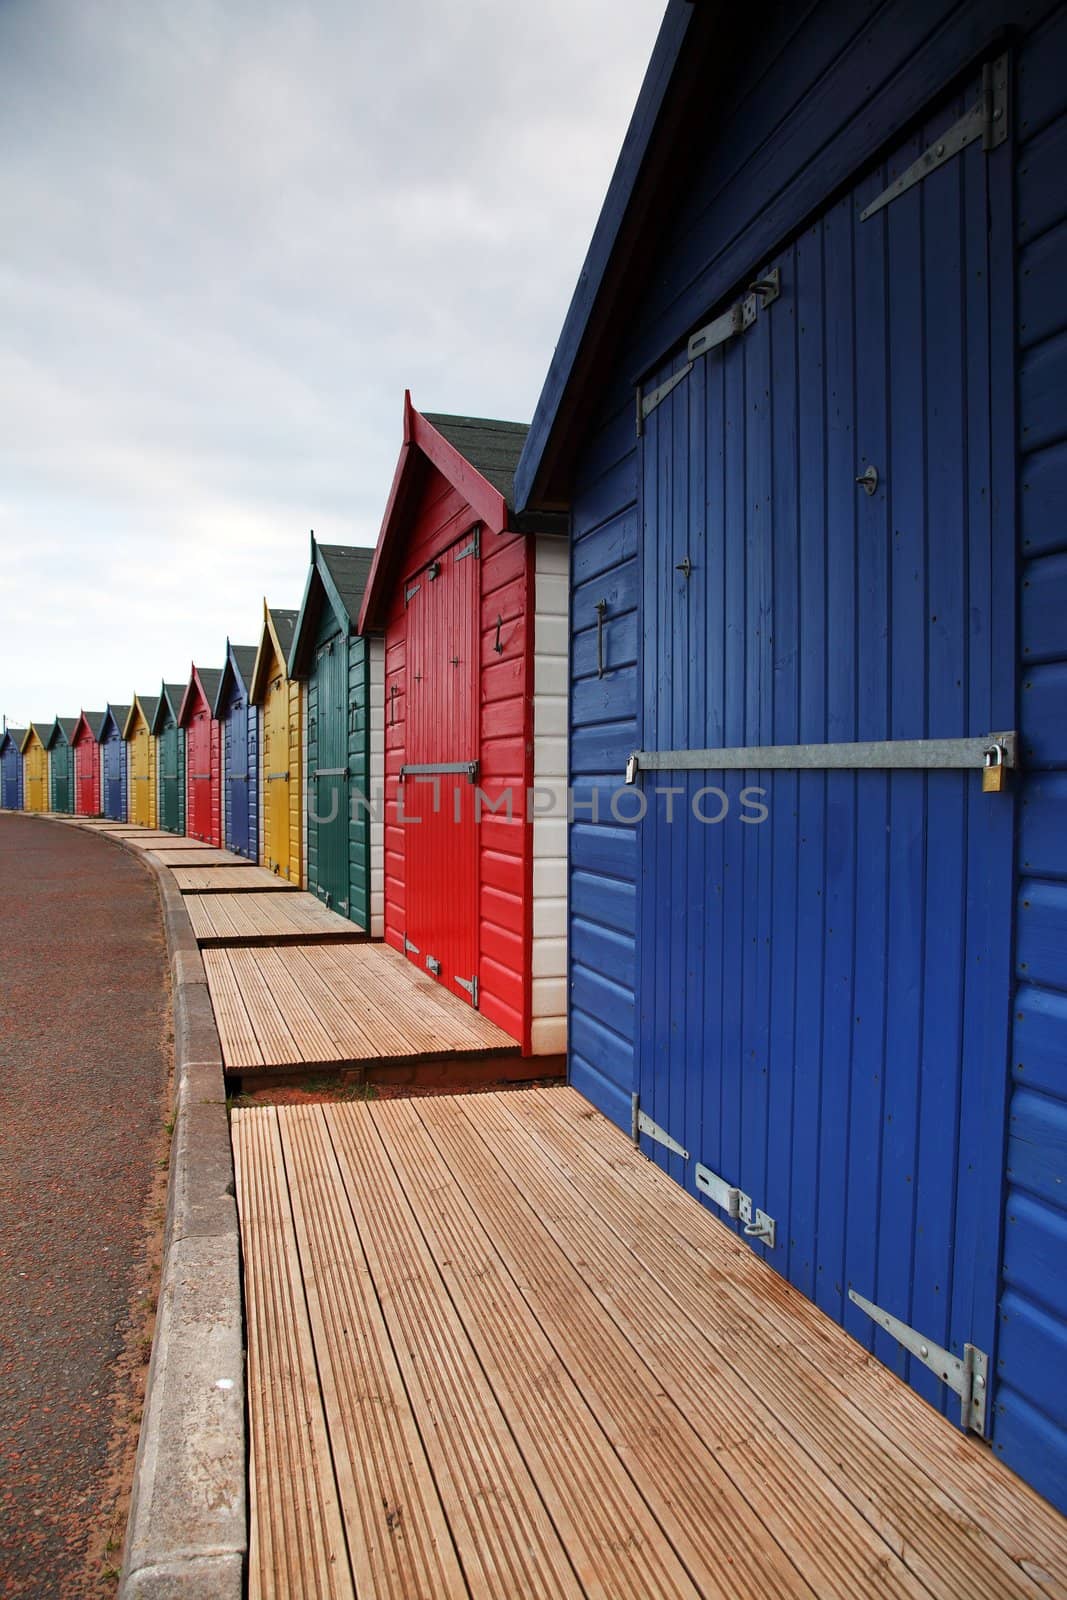 Beach Huts at Budleigh by olliemt